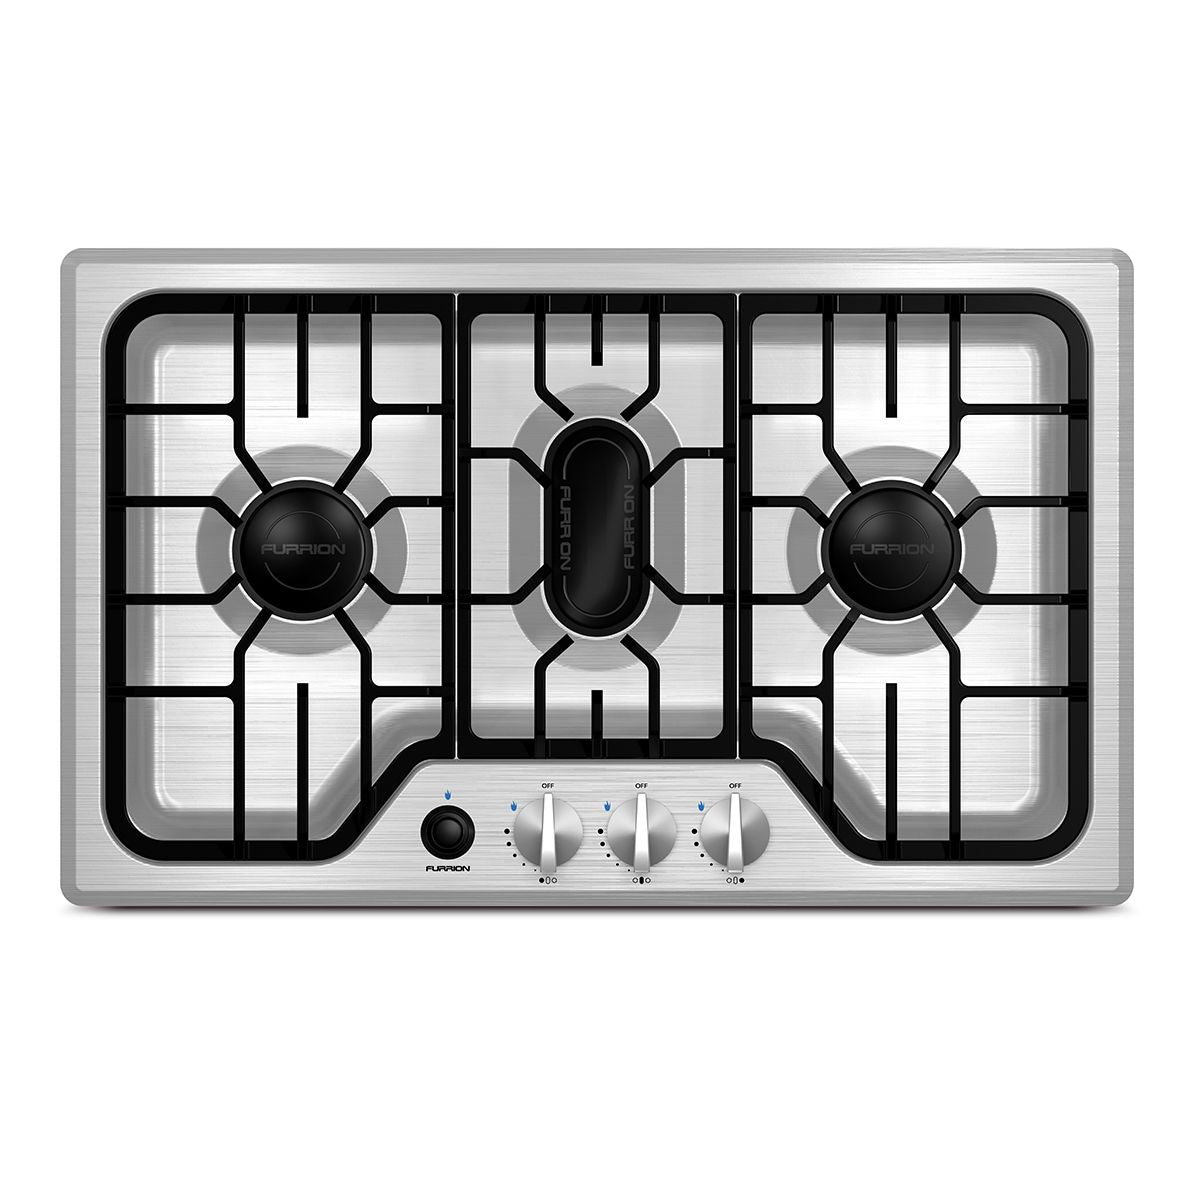 Lippert 2021123918 Furrion Chef Collection 3-Burner Gas Cooktop - Stainless Steel